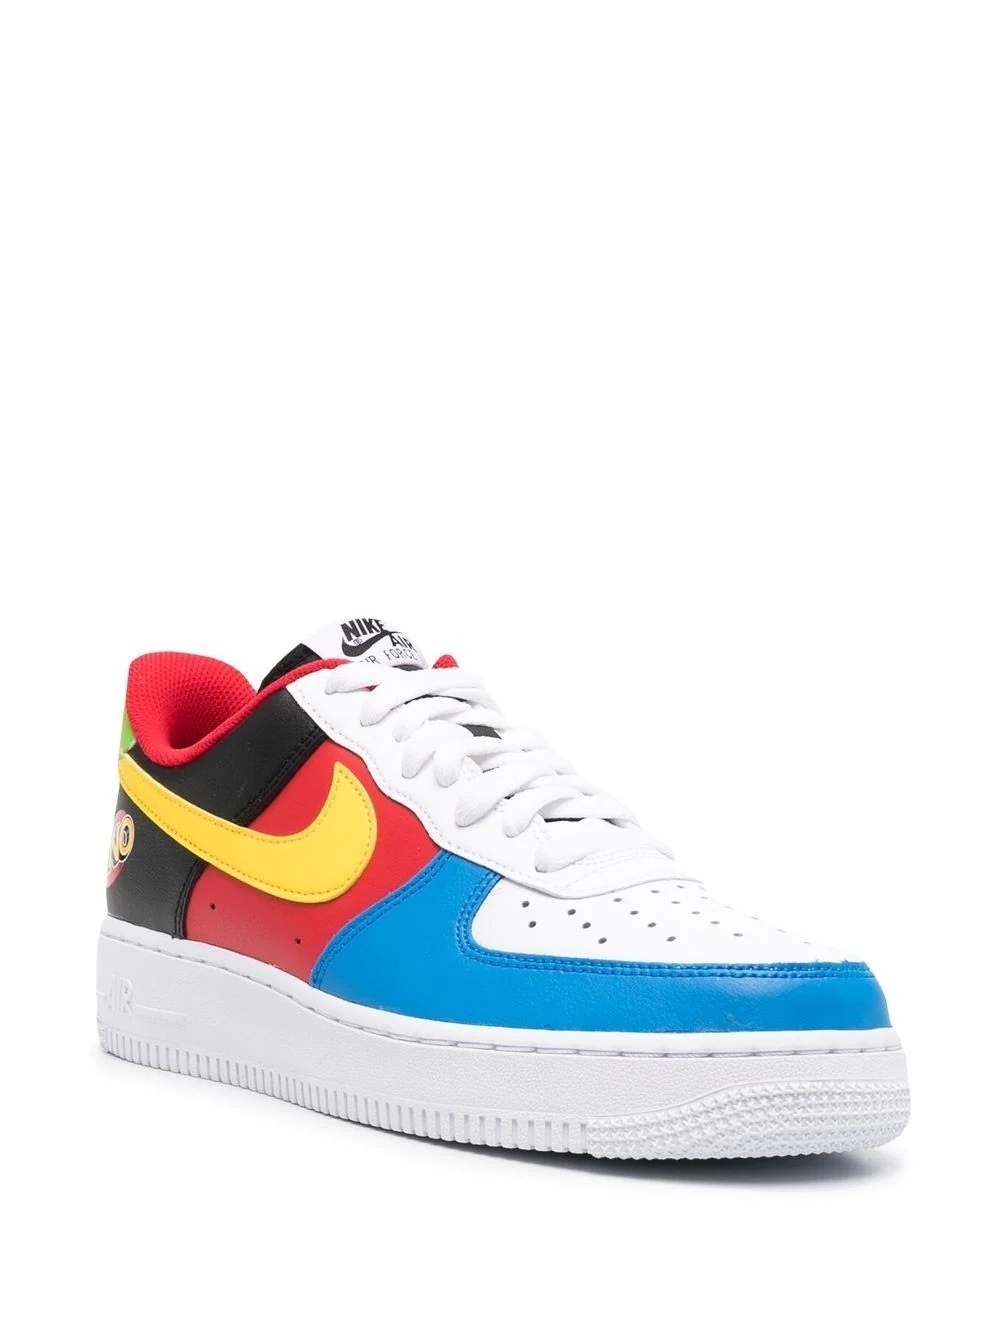 Air Force 1 '07 QS "Uno" sneakers - 2